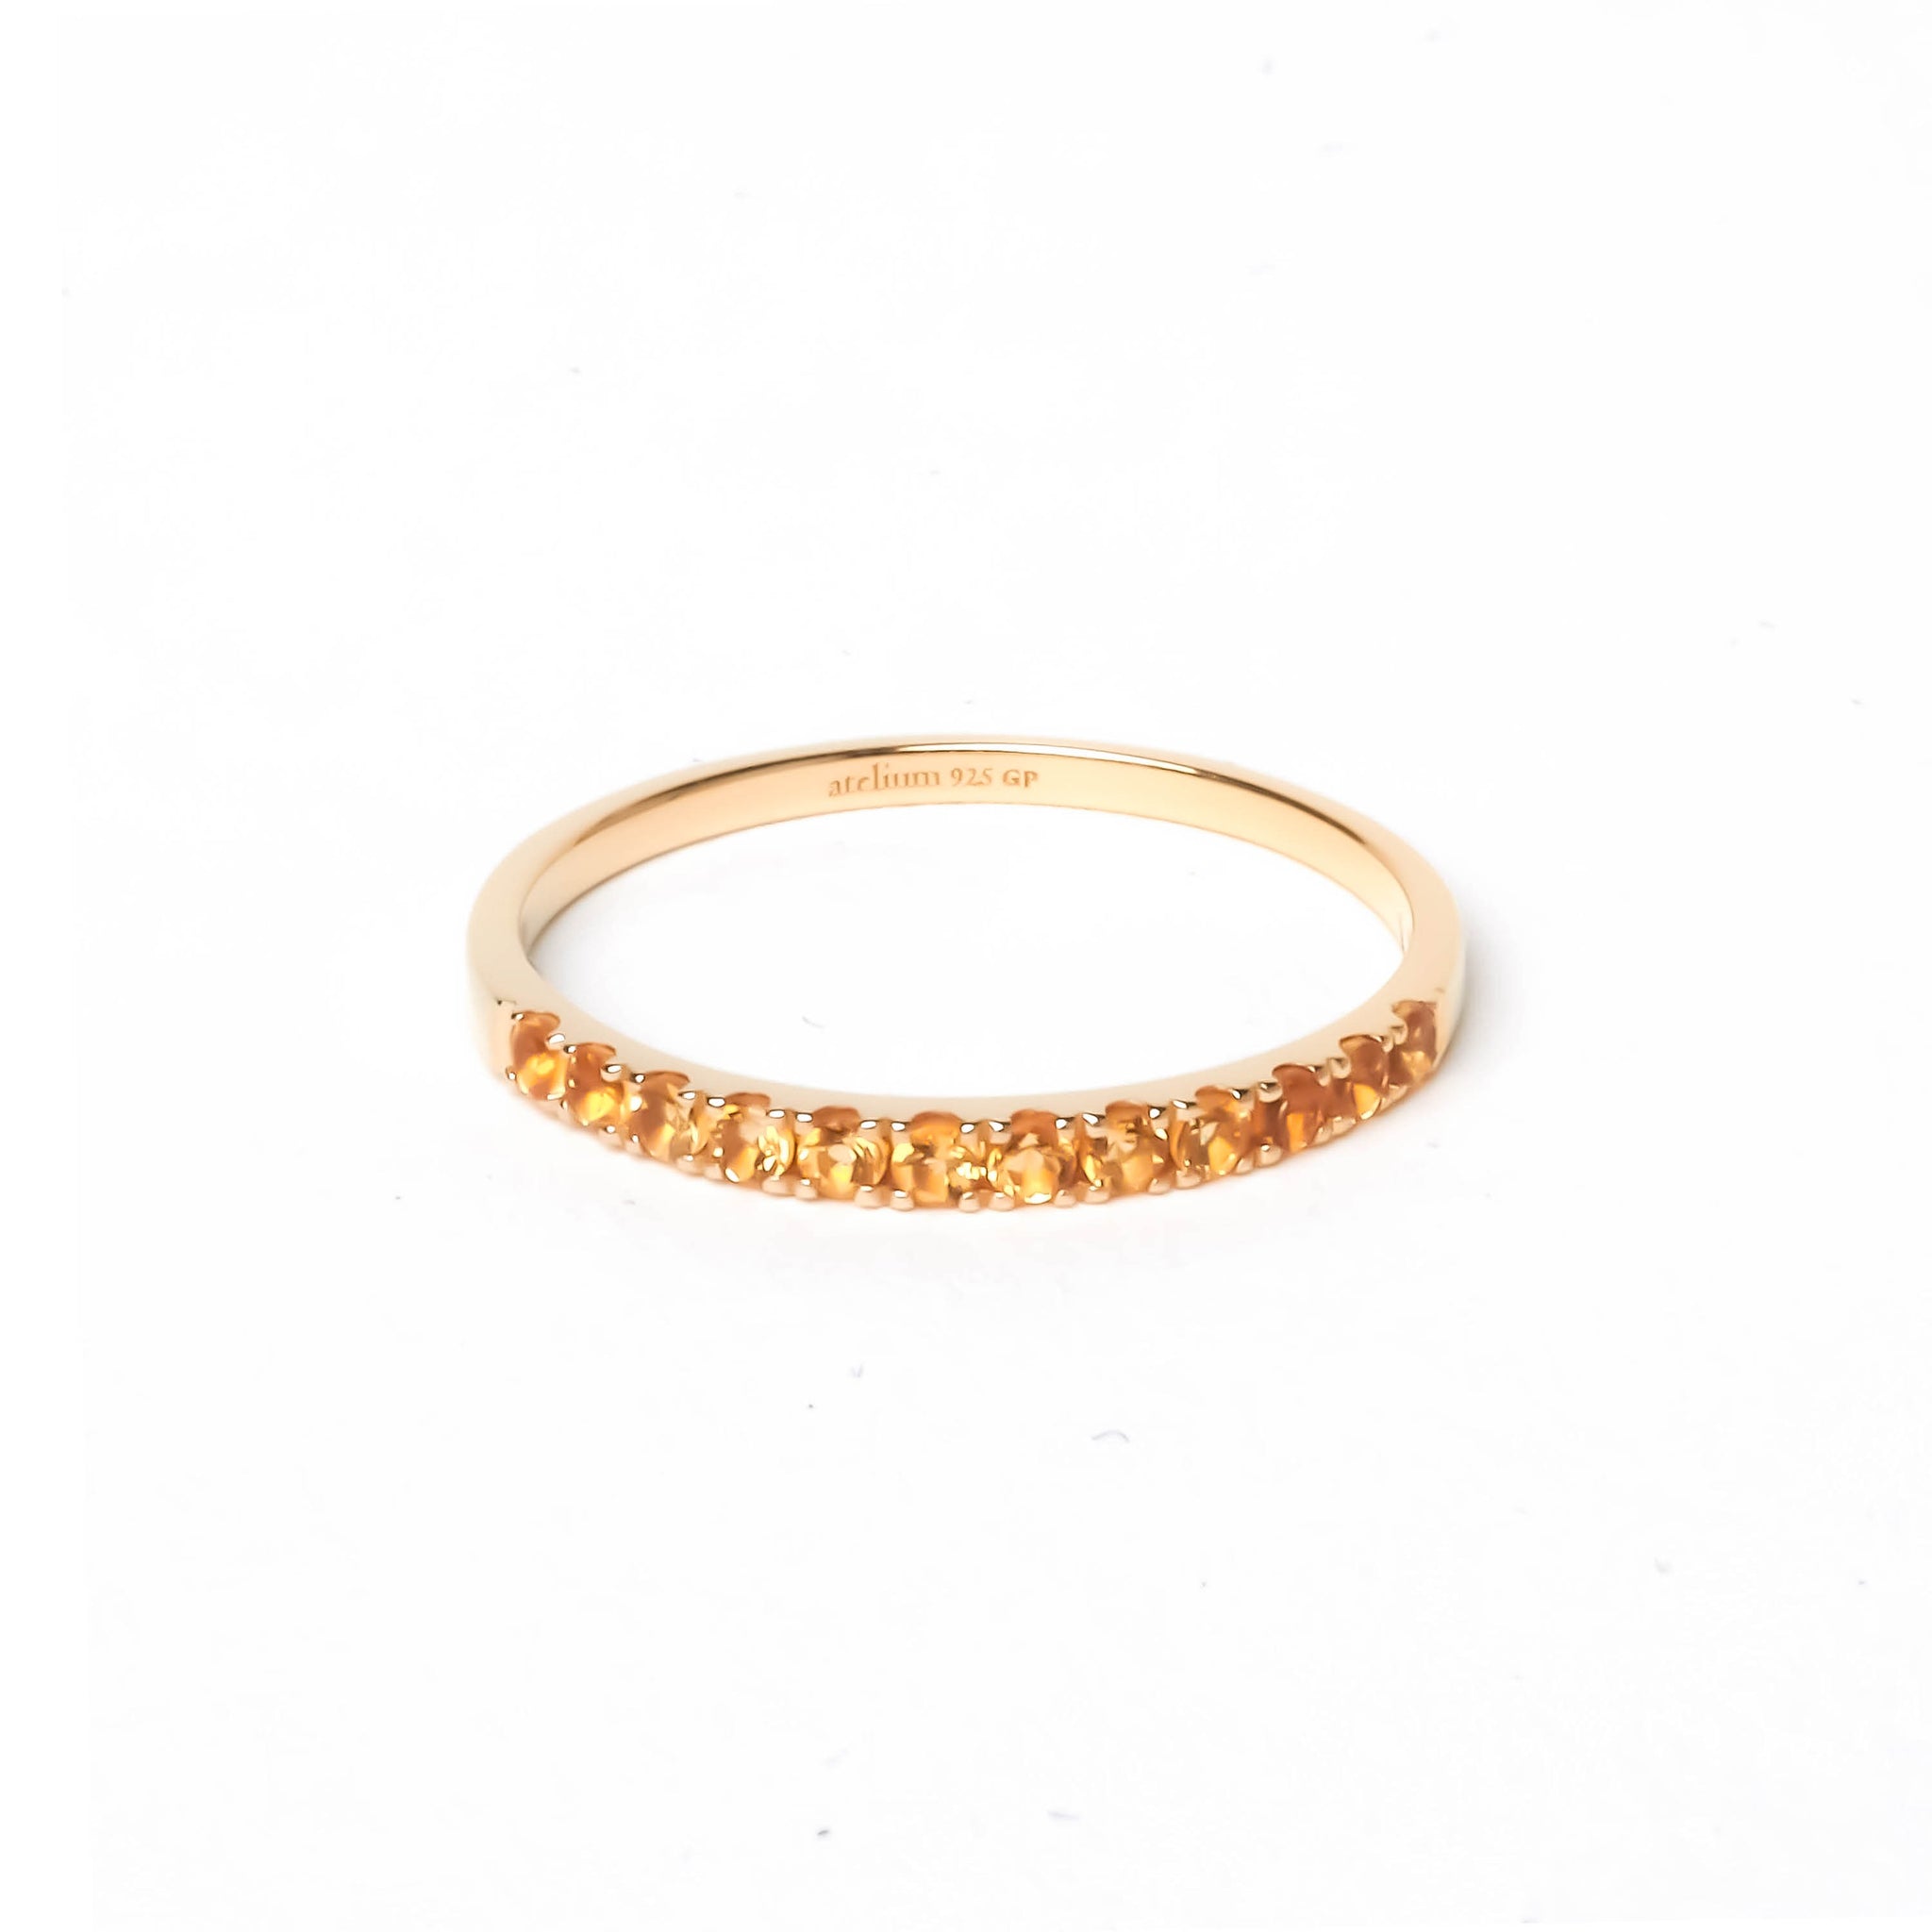 Thin gold ring with multiple citrine gemstones in yellowish orange color